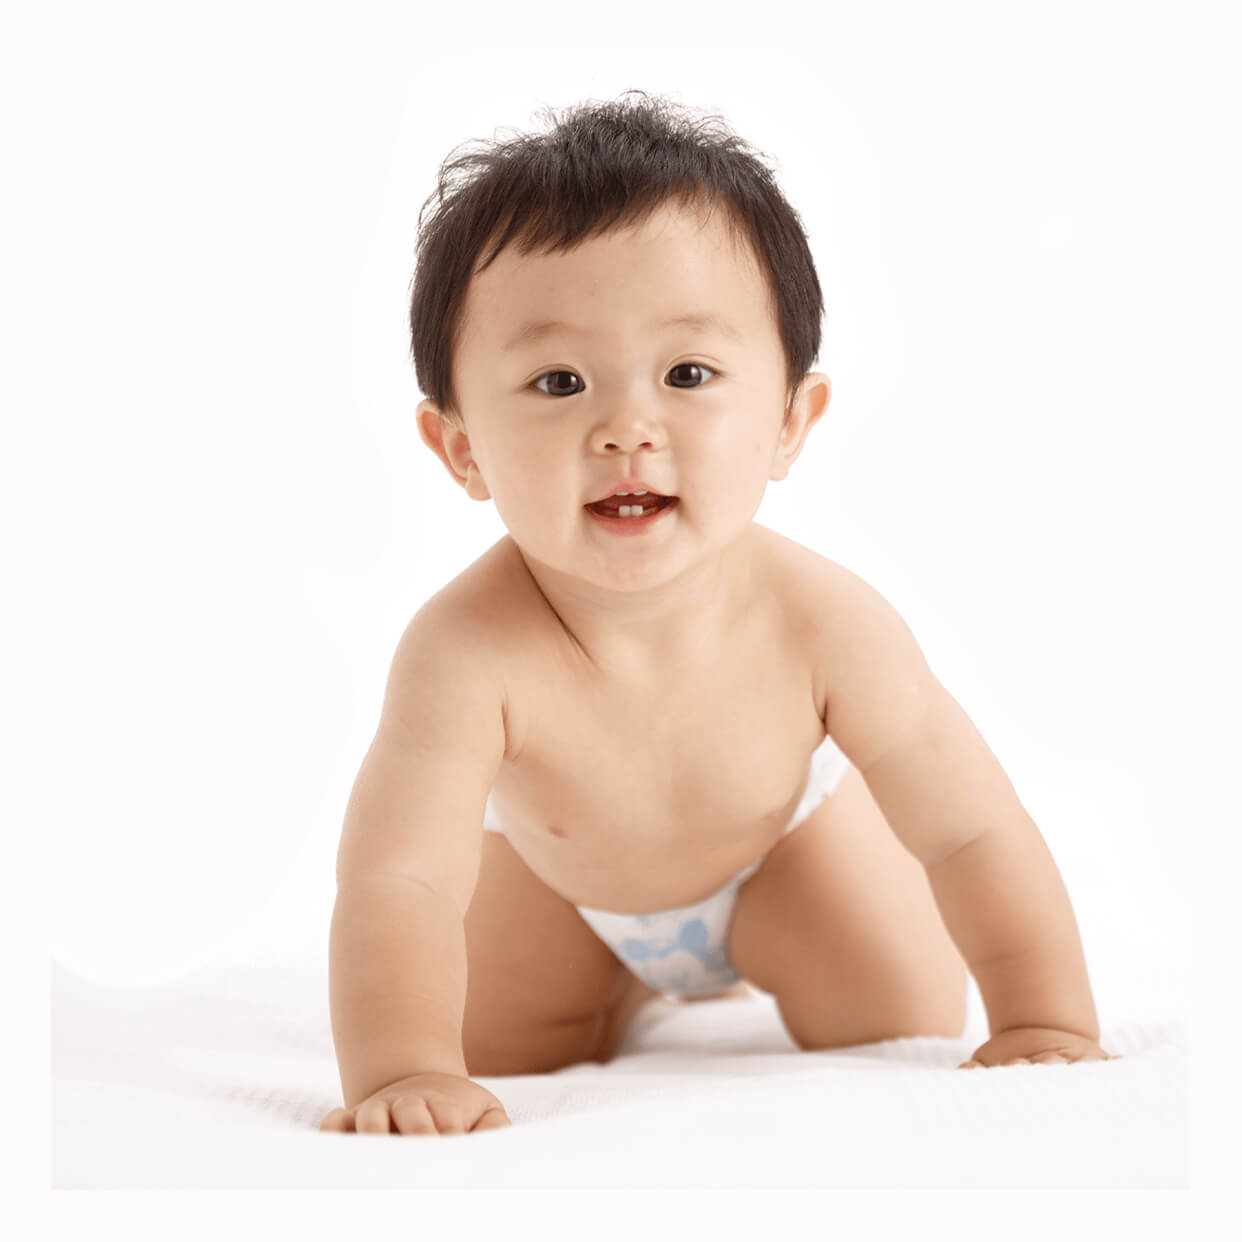 How do you know when you need to purchase larger size disposable diapers?